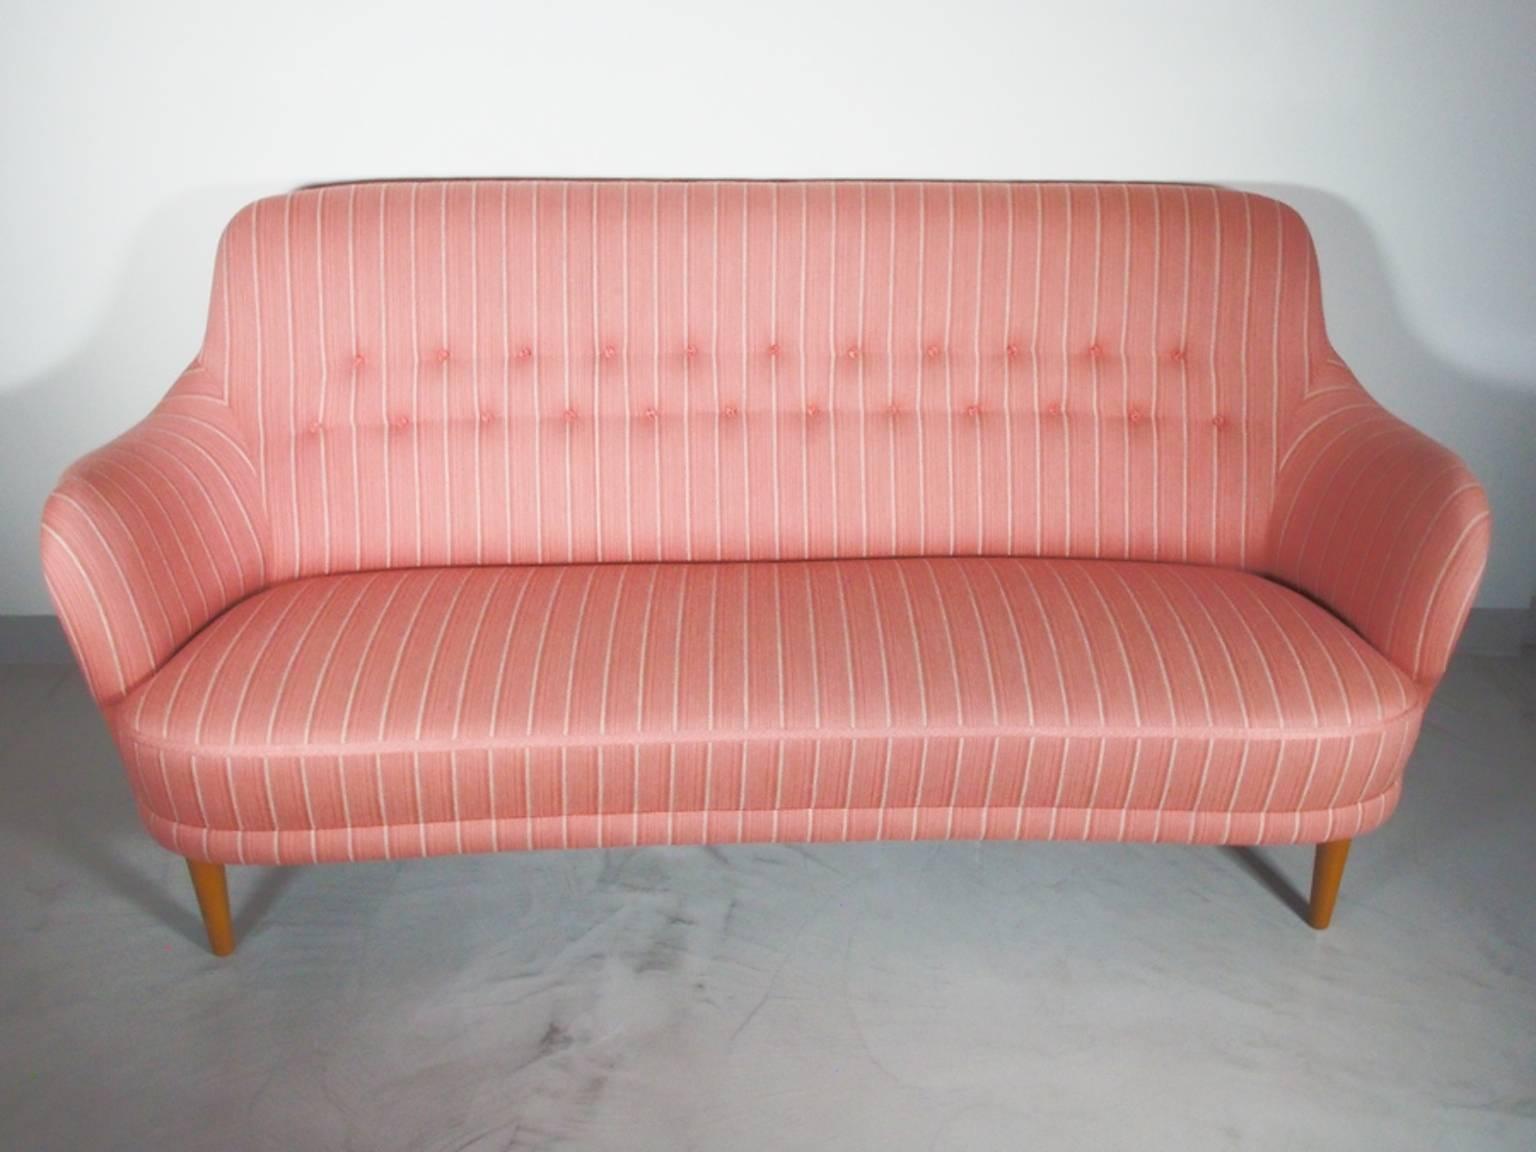 This three-seat "Samsas" sofa by Carl Malmsten is manufactured by O.H Sjogren in Sweden during the 1960s. It was originally designed by Malmsten in 1923. Professionally cleaned original pink and white striped wool upholstery, stained beech